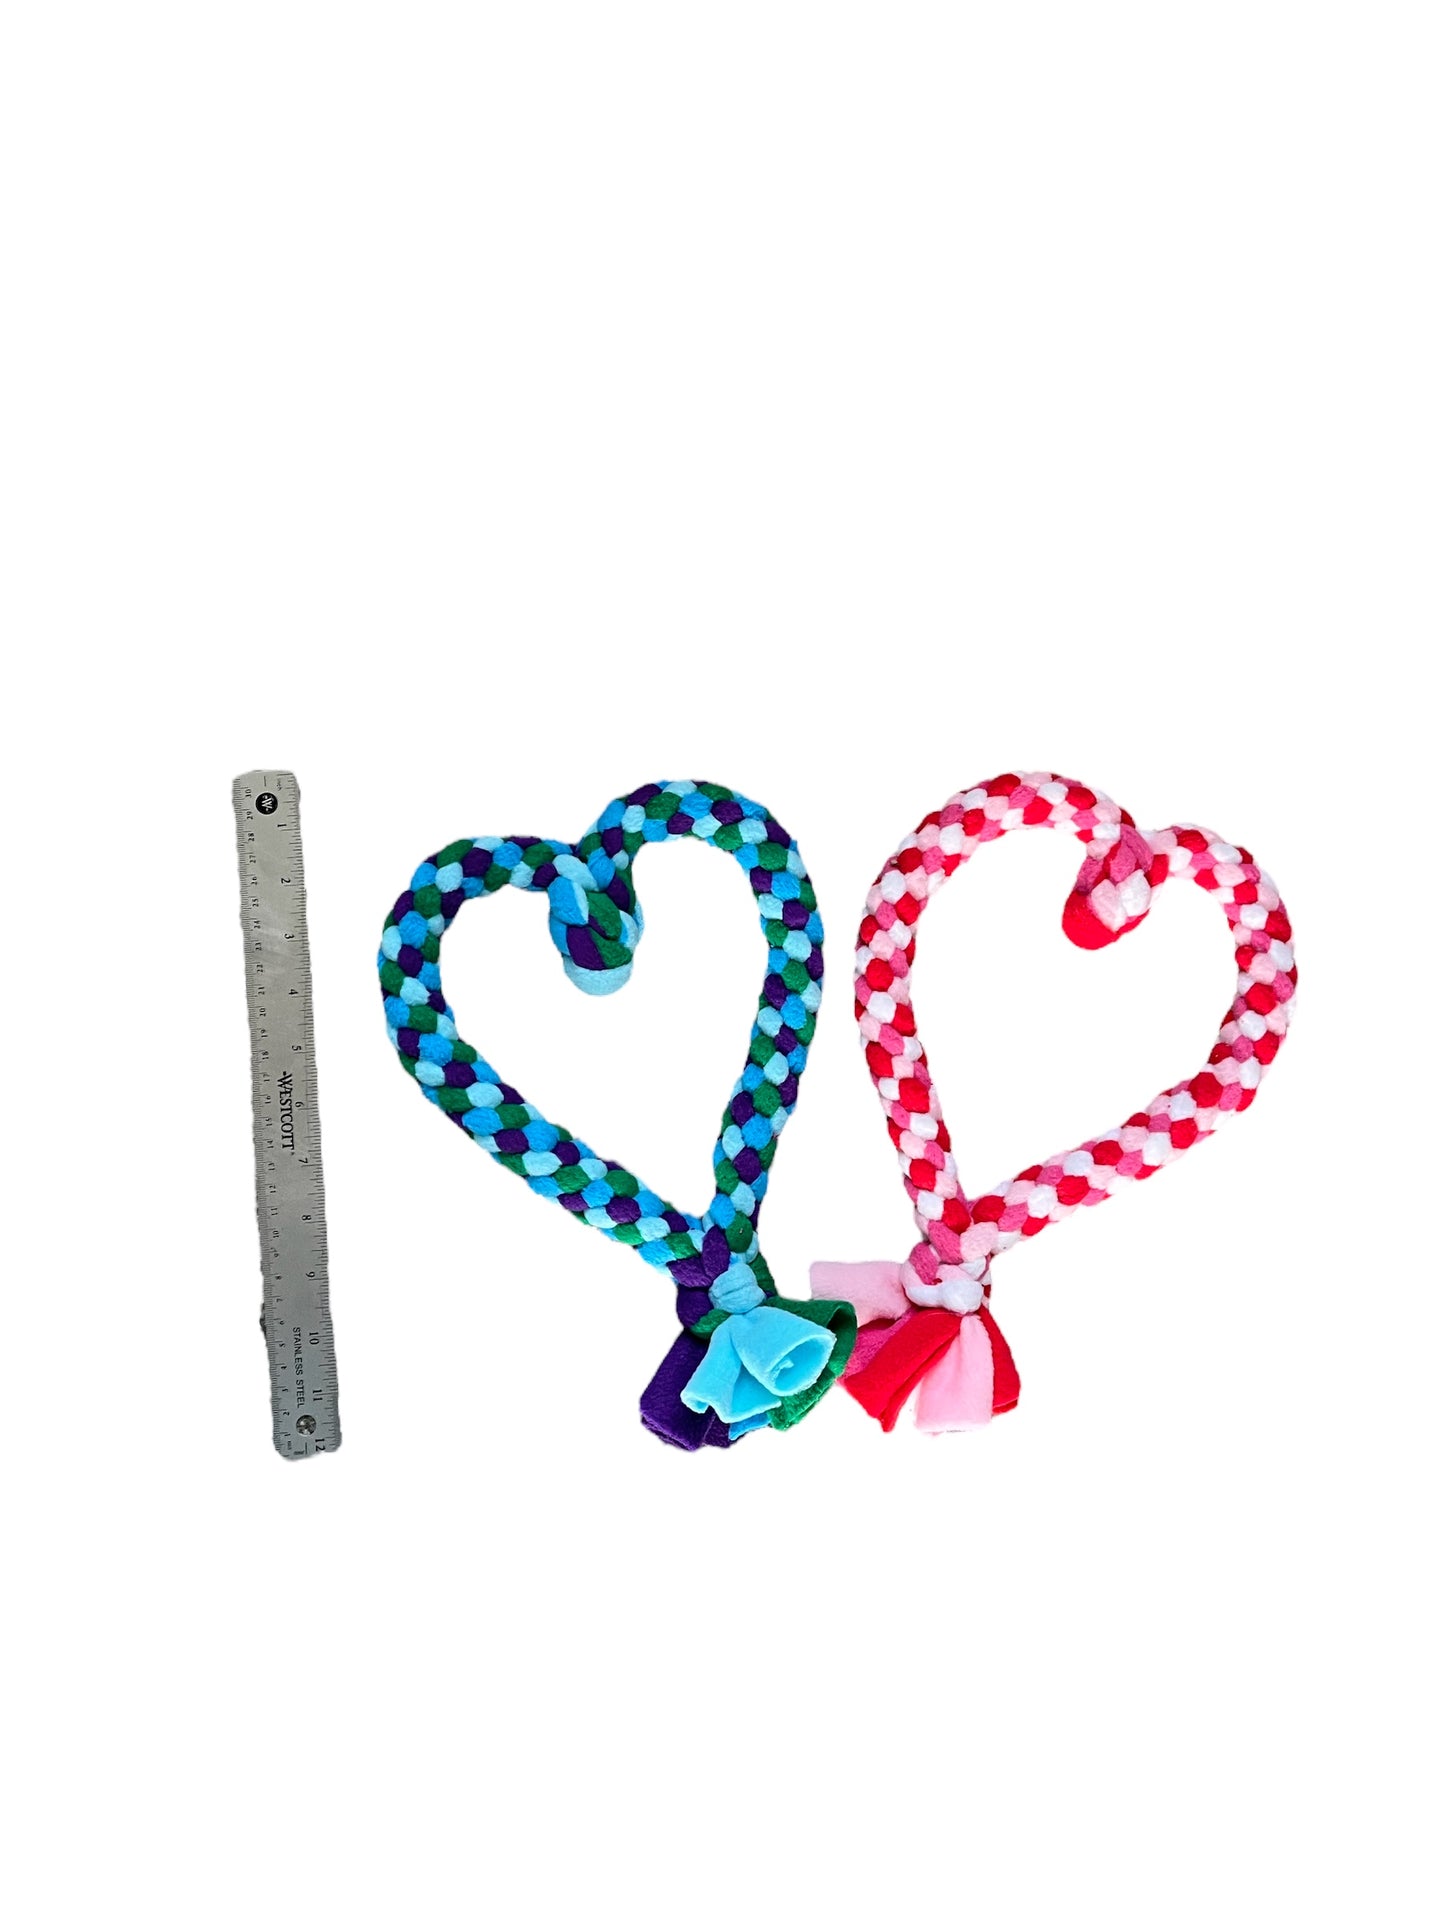 4 colour Heart shaped hand made tug toy create your own dog toy